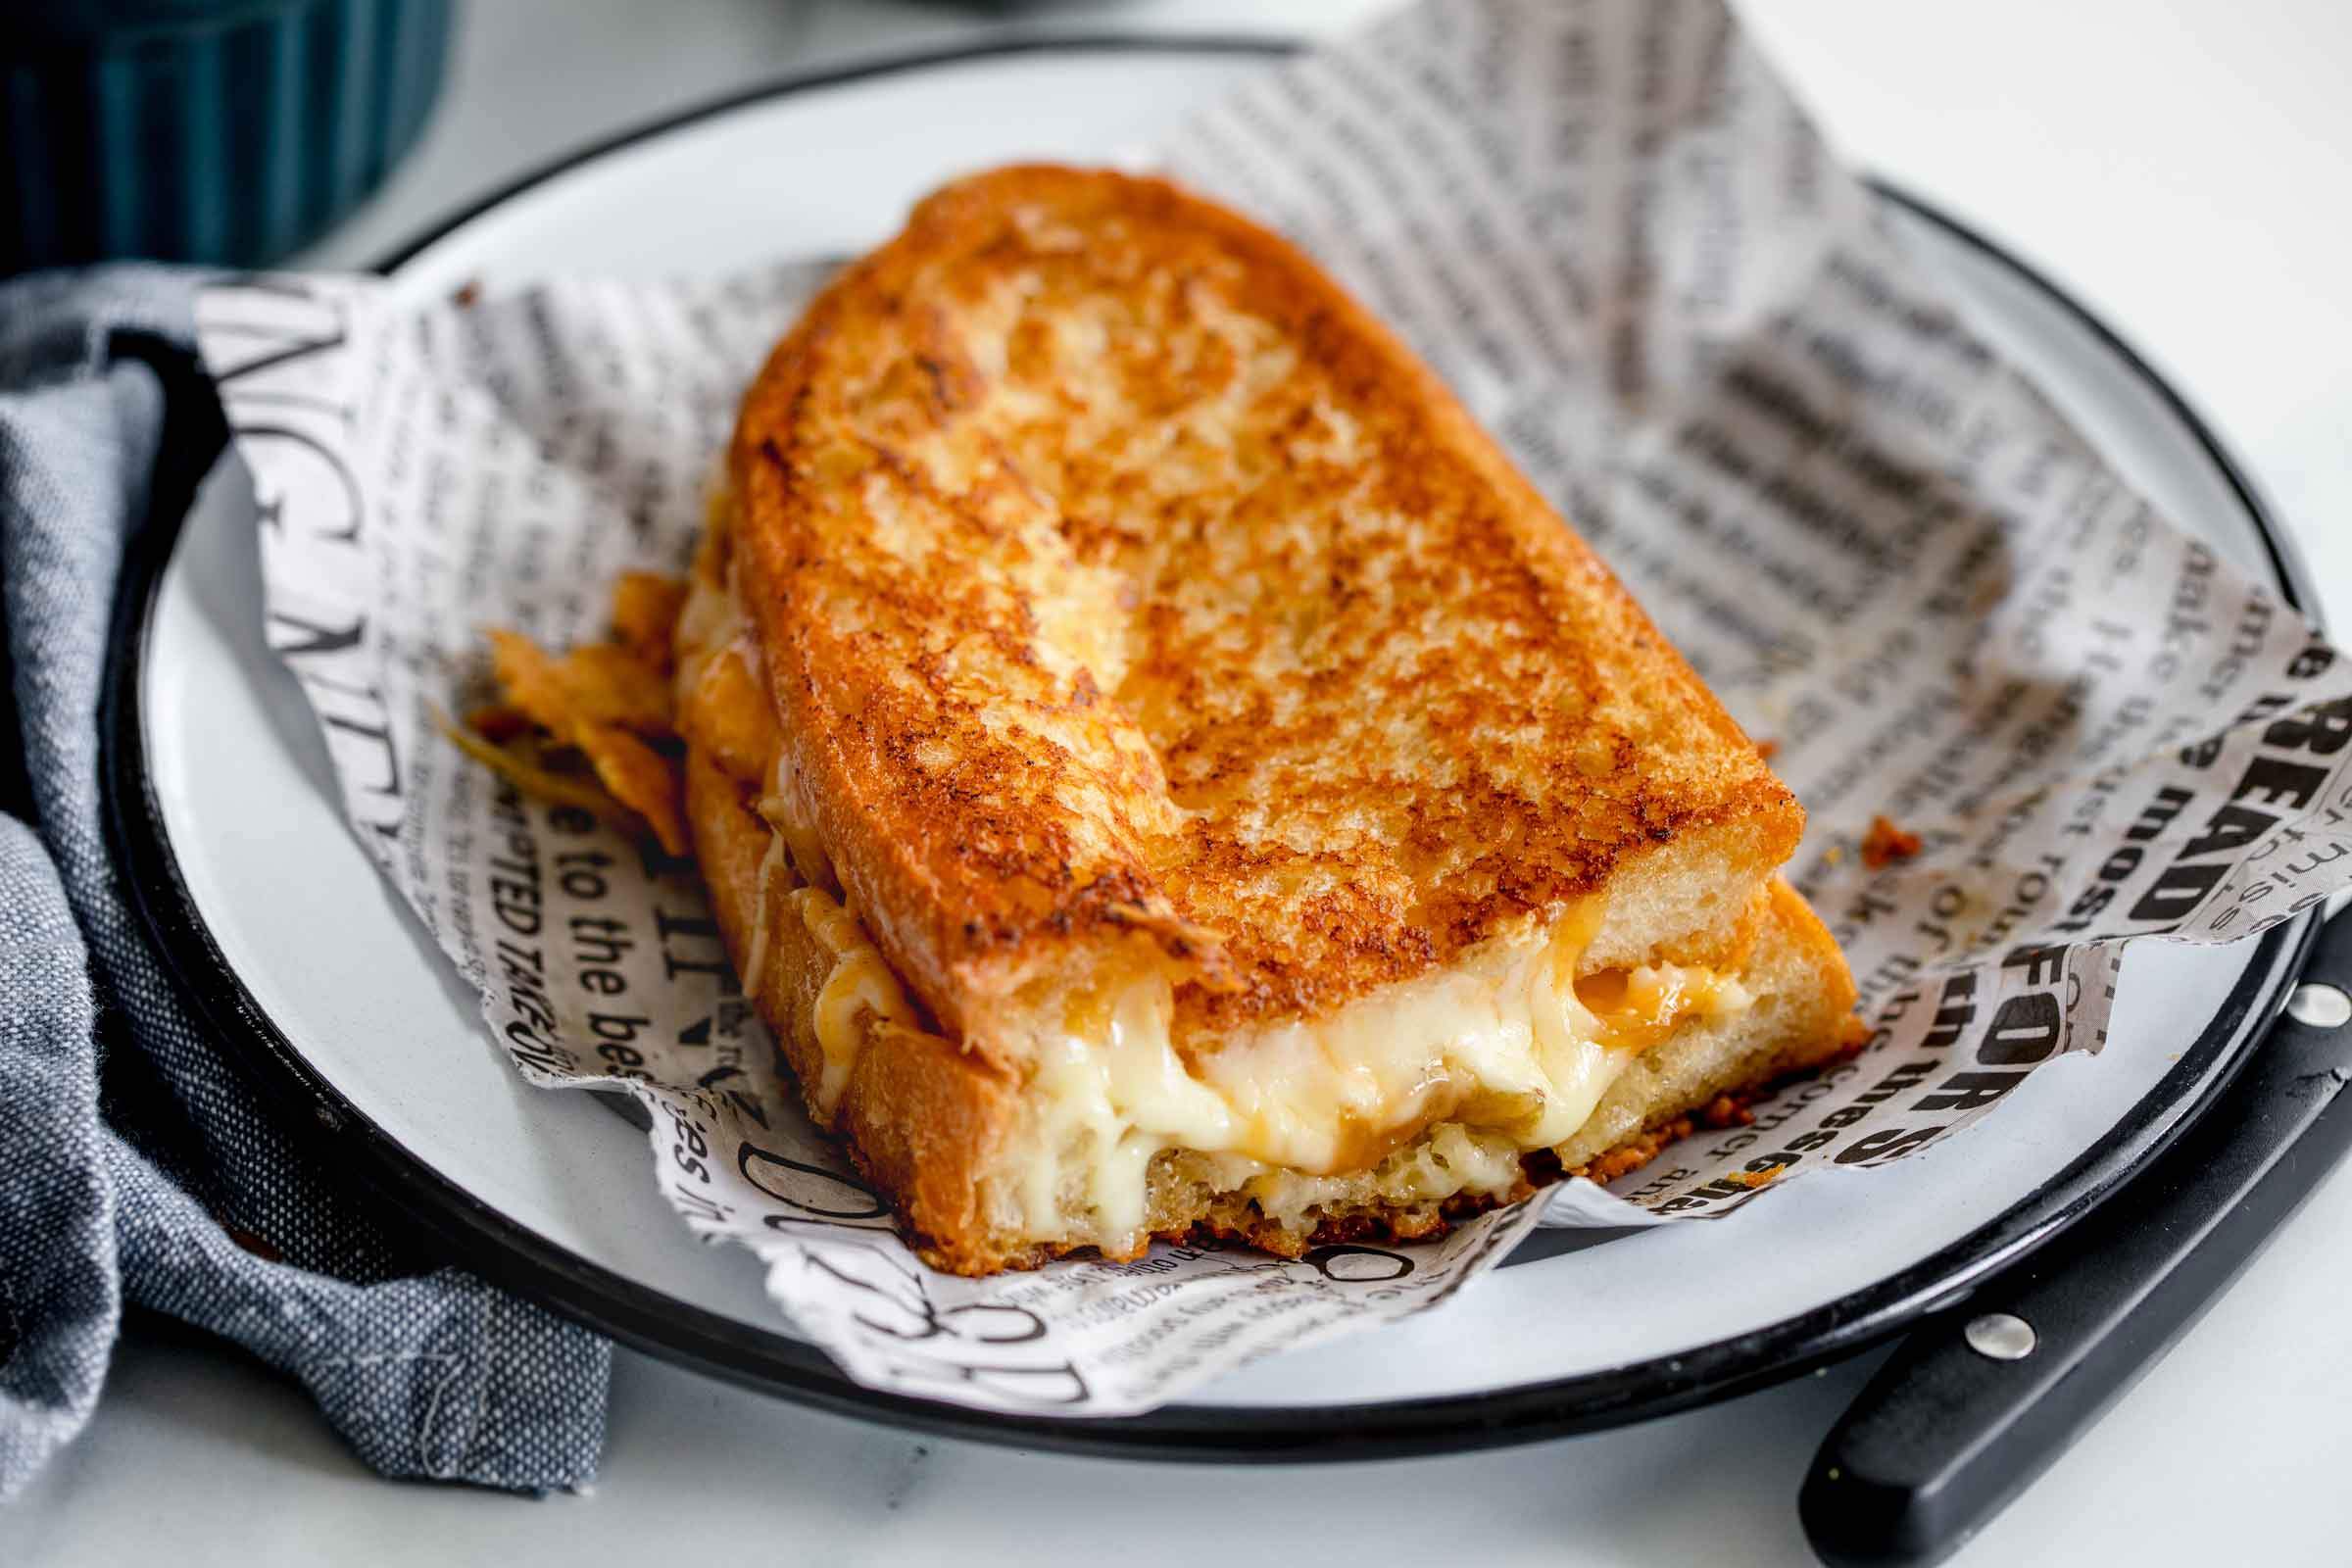 Gourmet Toasted Cheese Sandwich